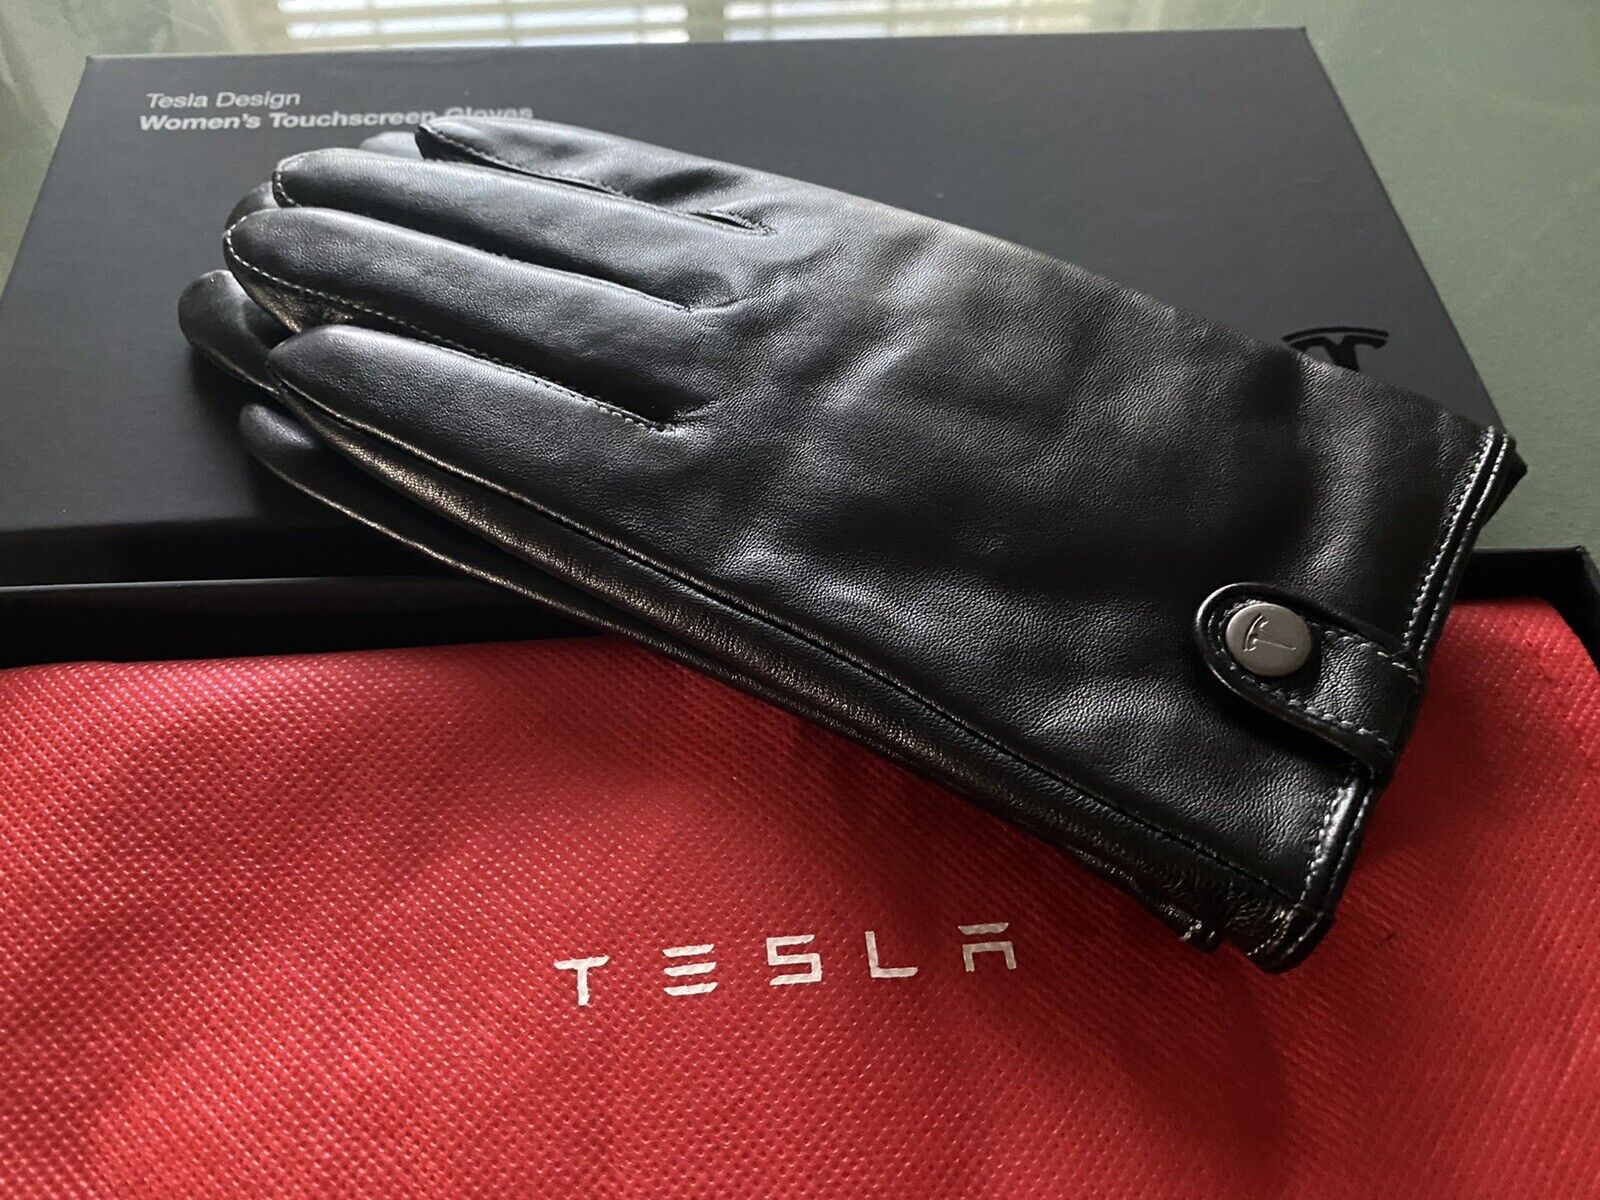 Rare New Original Tesla Roadster Touchscreen Leather Womens Driving Gloves - M